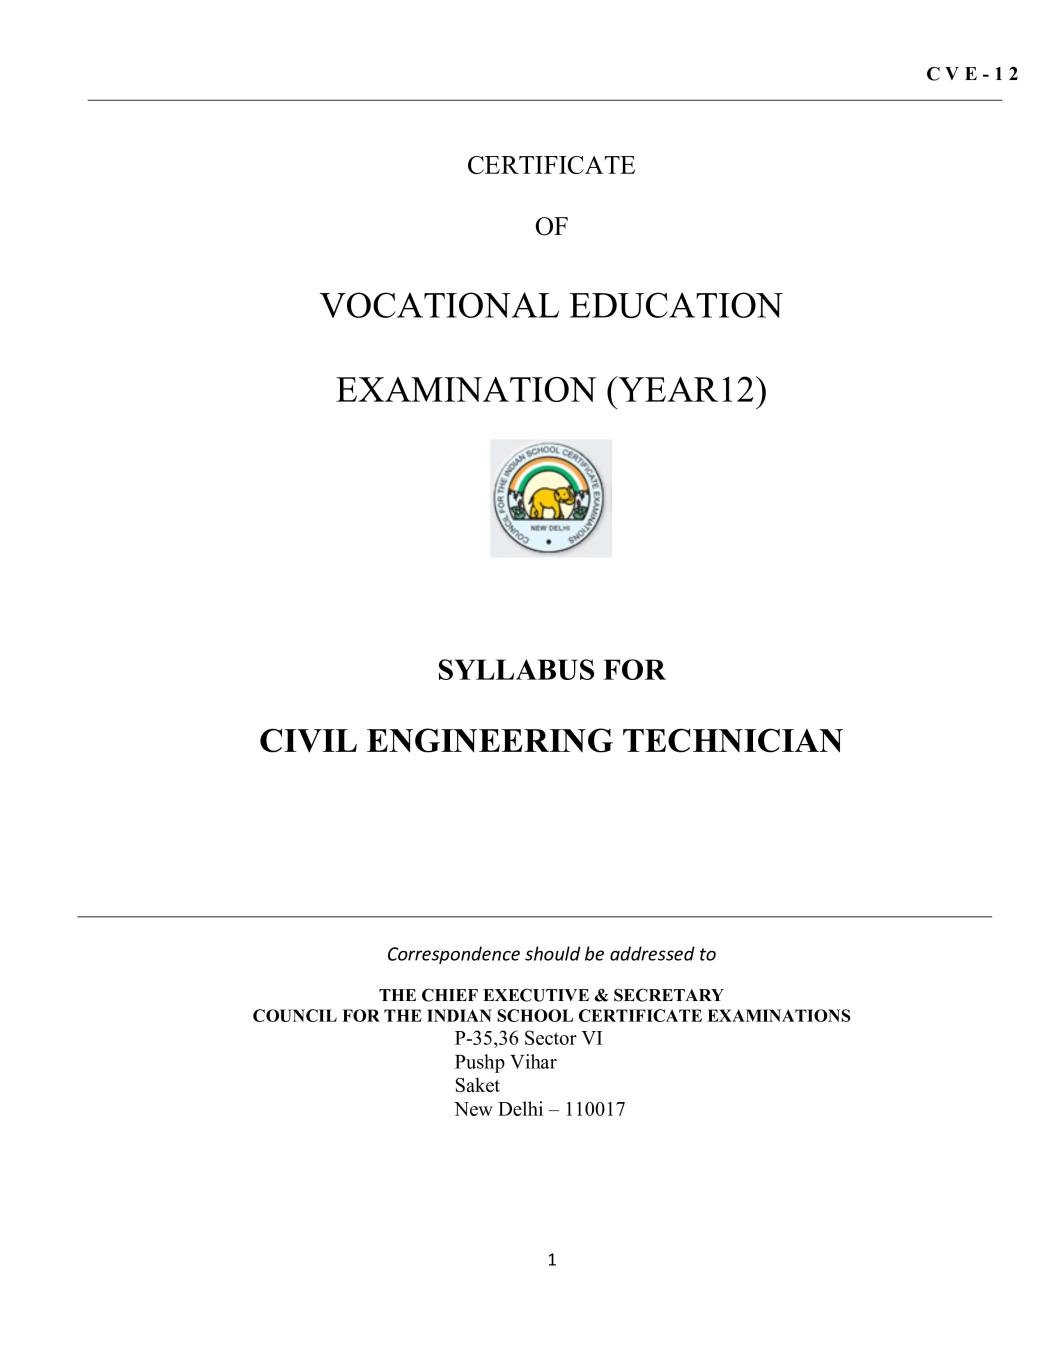 ISC Class 12 Civil Engineering Technician Syllabus 2020 (Vocational Course) - Page 1